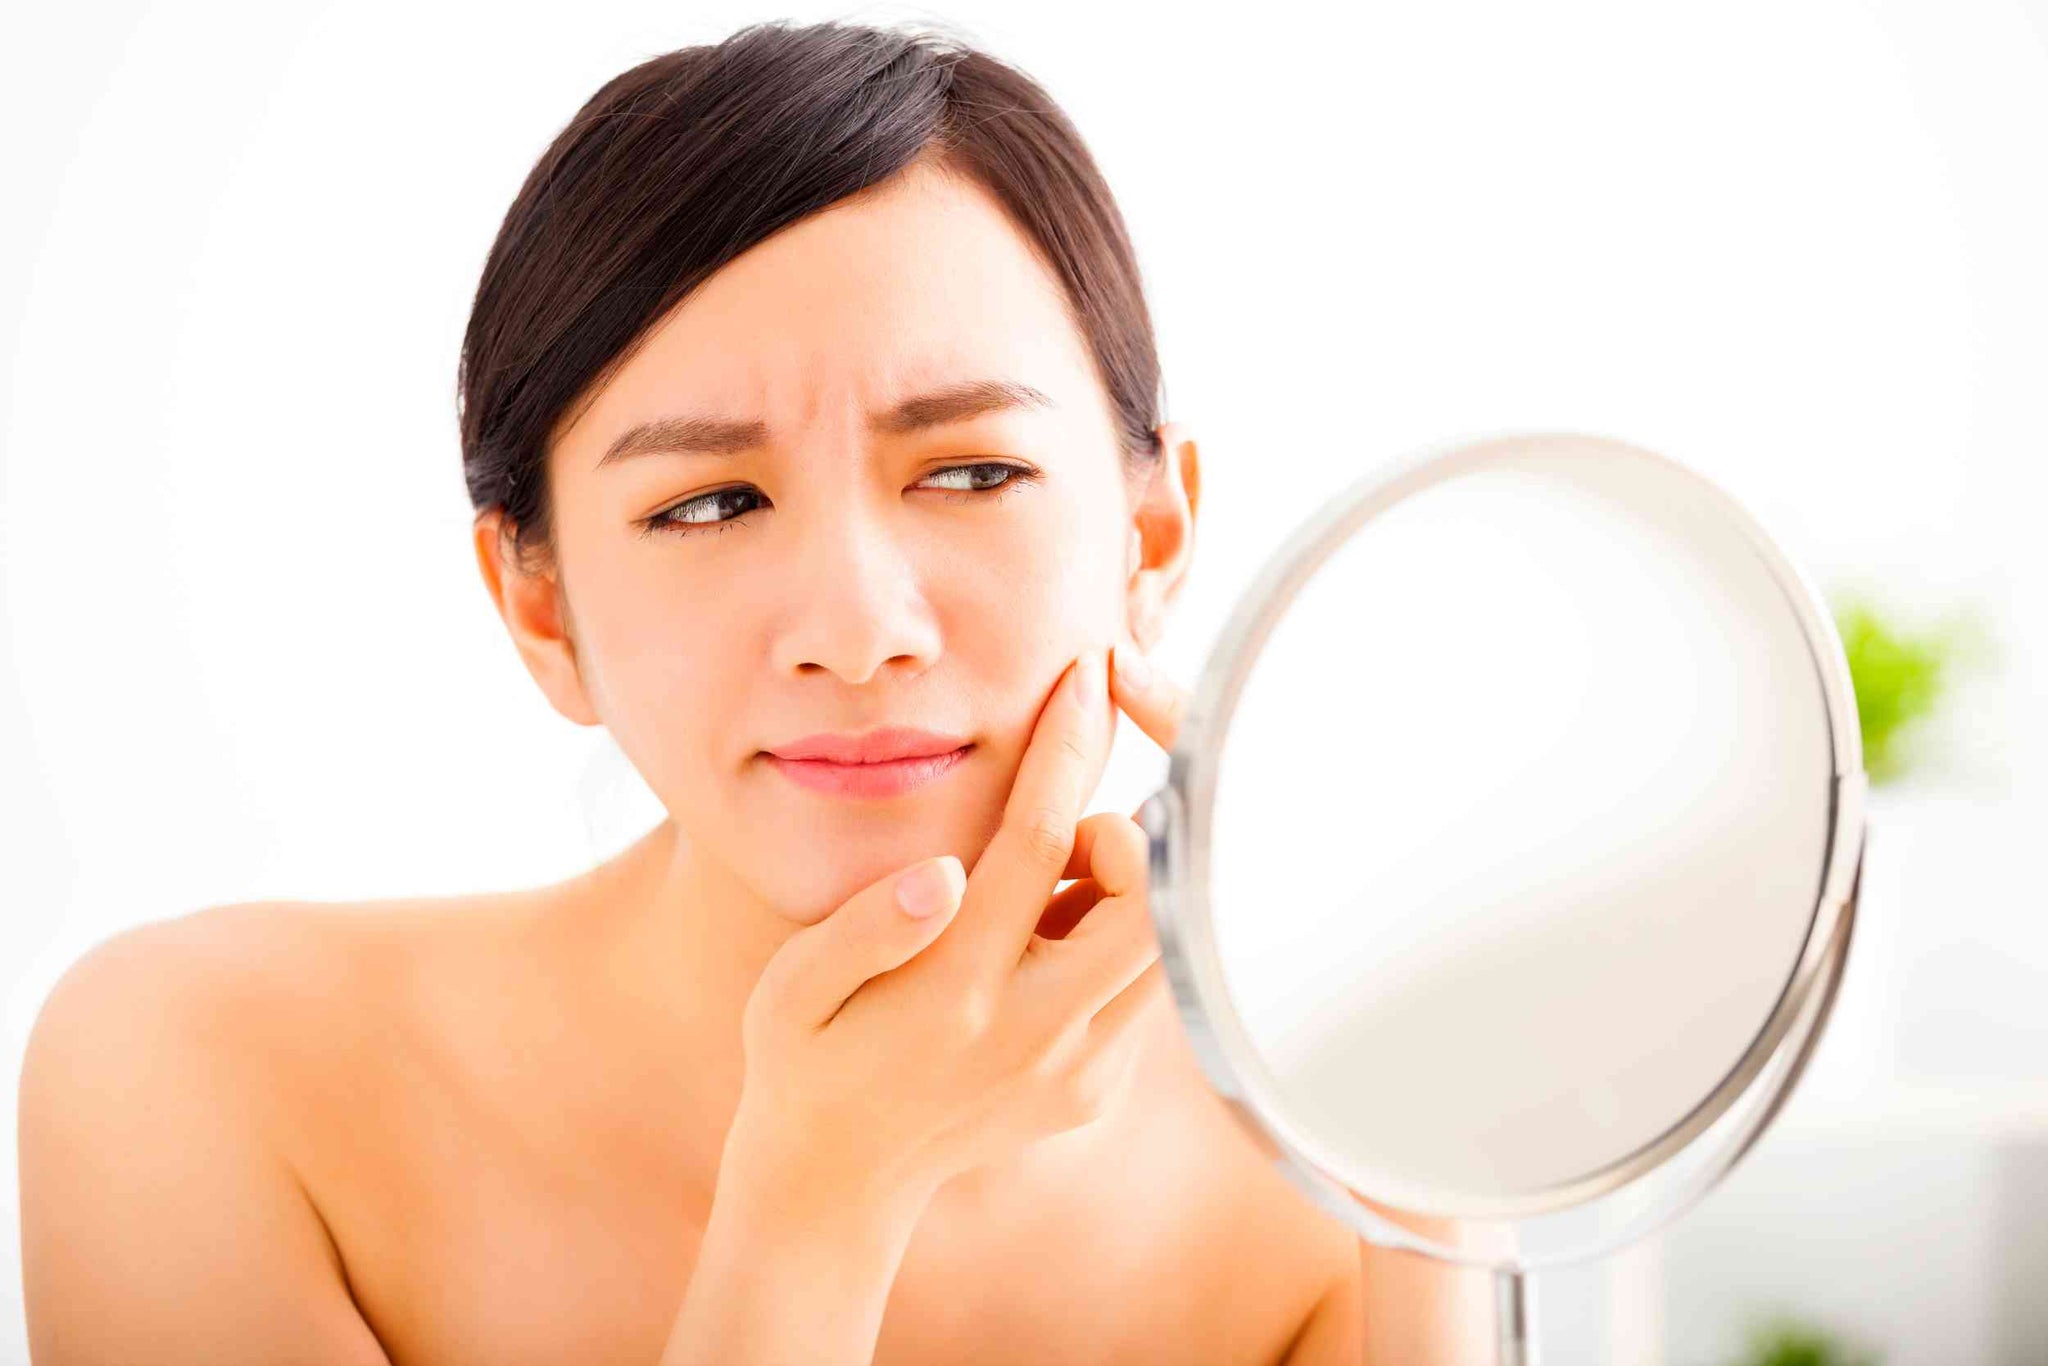 Worst Pimple Mistakes and How to Avoid Them